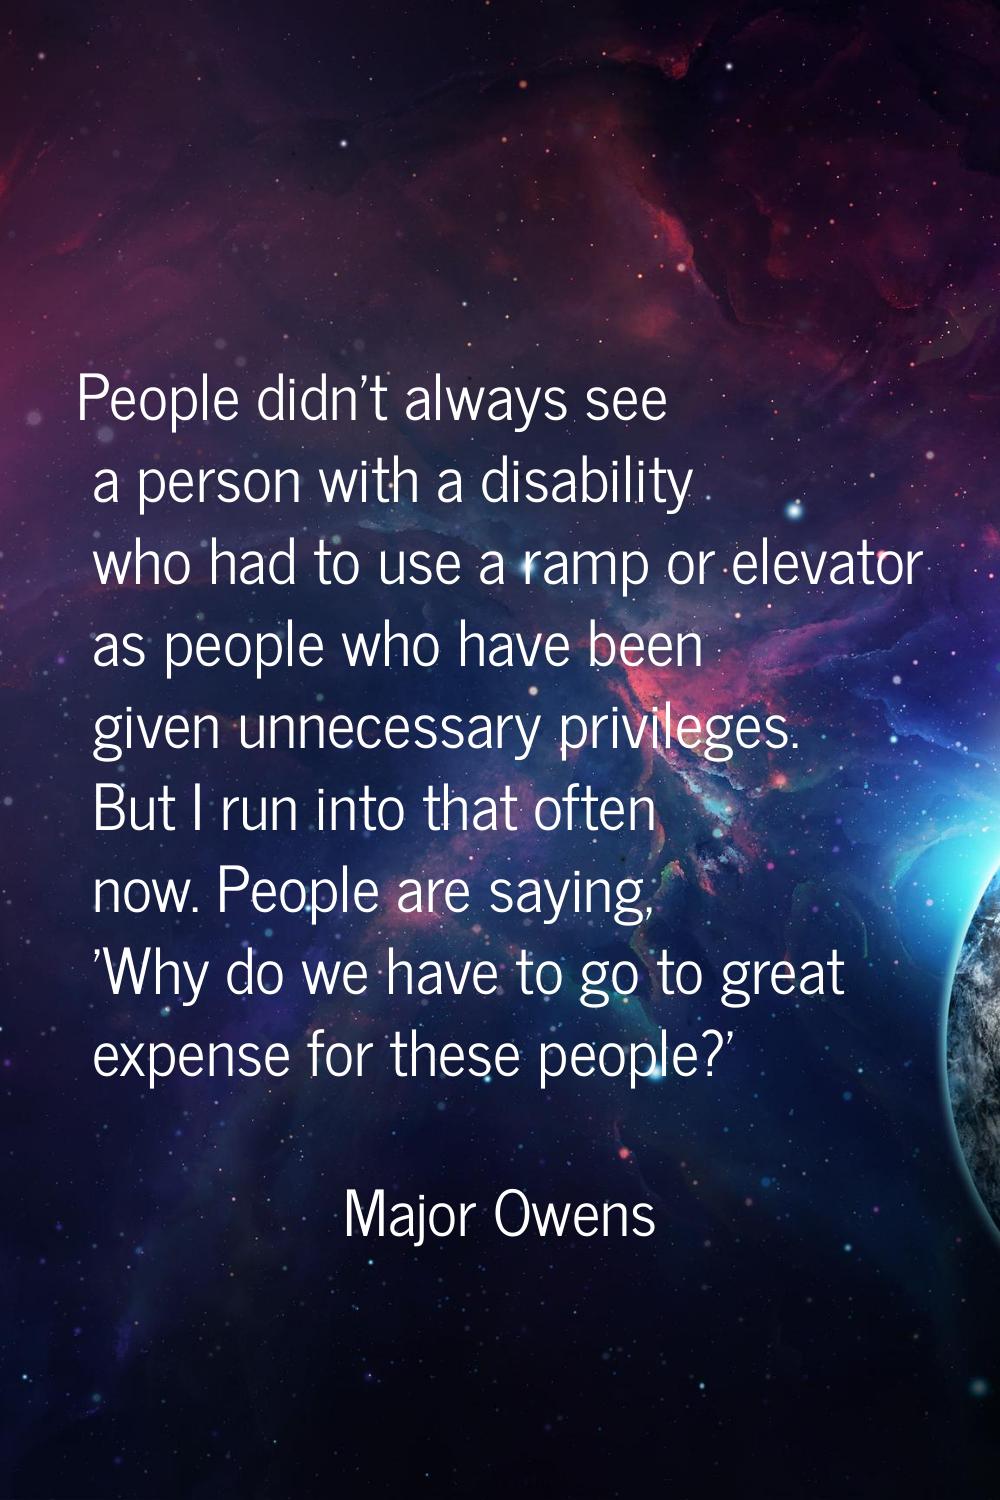 People didn't always see a person with a disability who had to use a ramp or elevator as people who